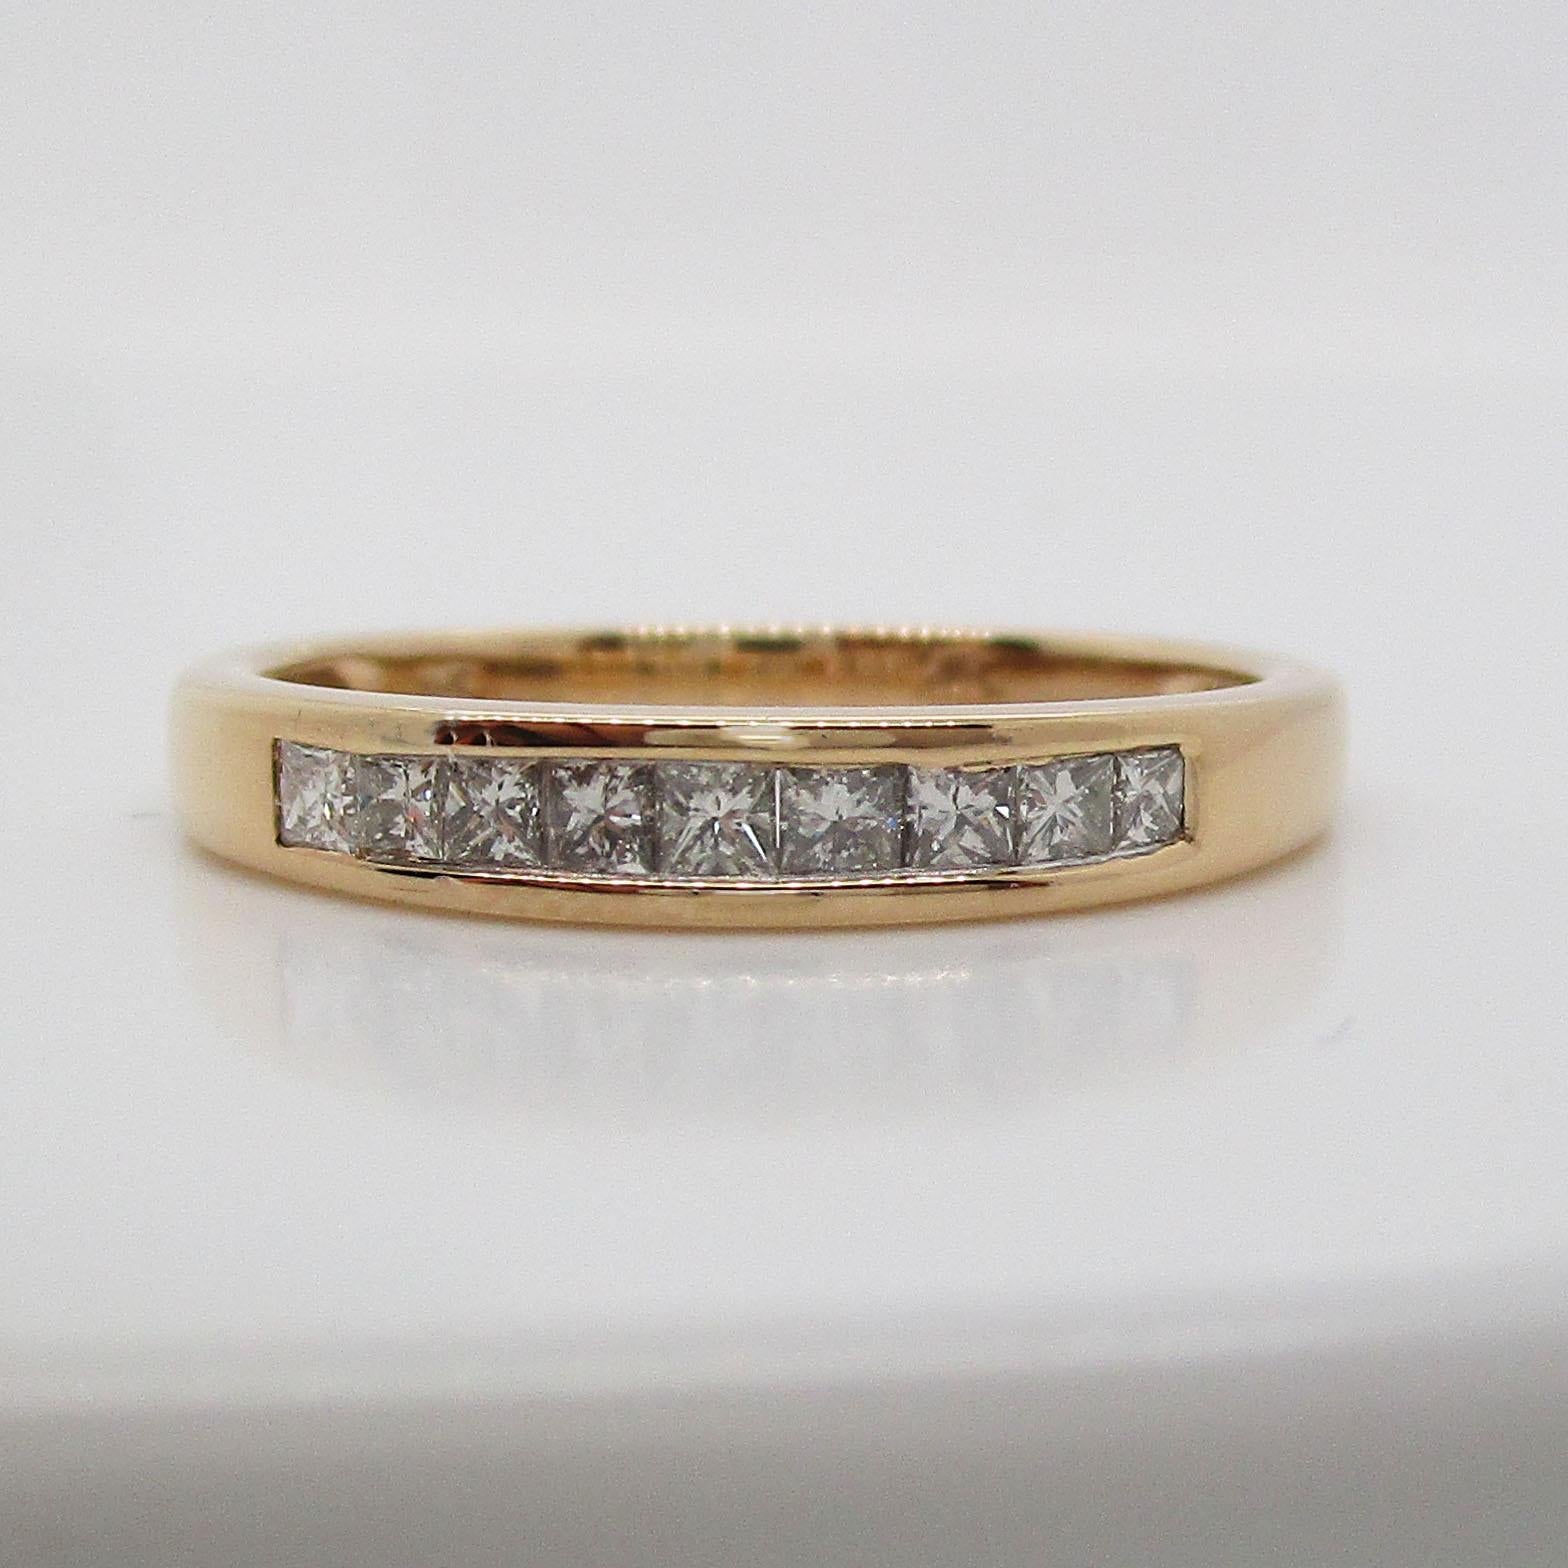 This is a beautiful contemporary wedding band in bright 14k yellow gold with a stunning array of channel set princess cut diamonds! The band is in mint condition! The warmth of the 14k yellow gold is the perfect backdrop for the brilliance of the